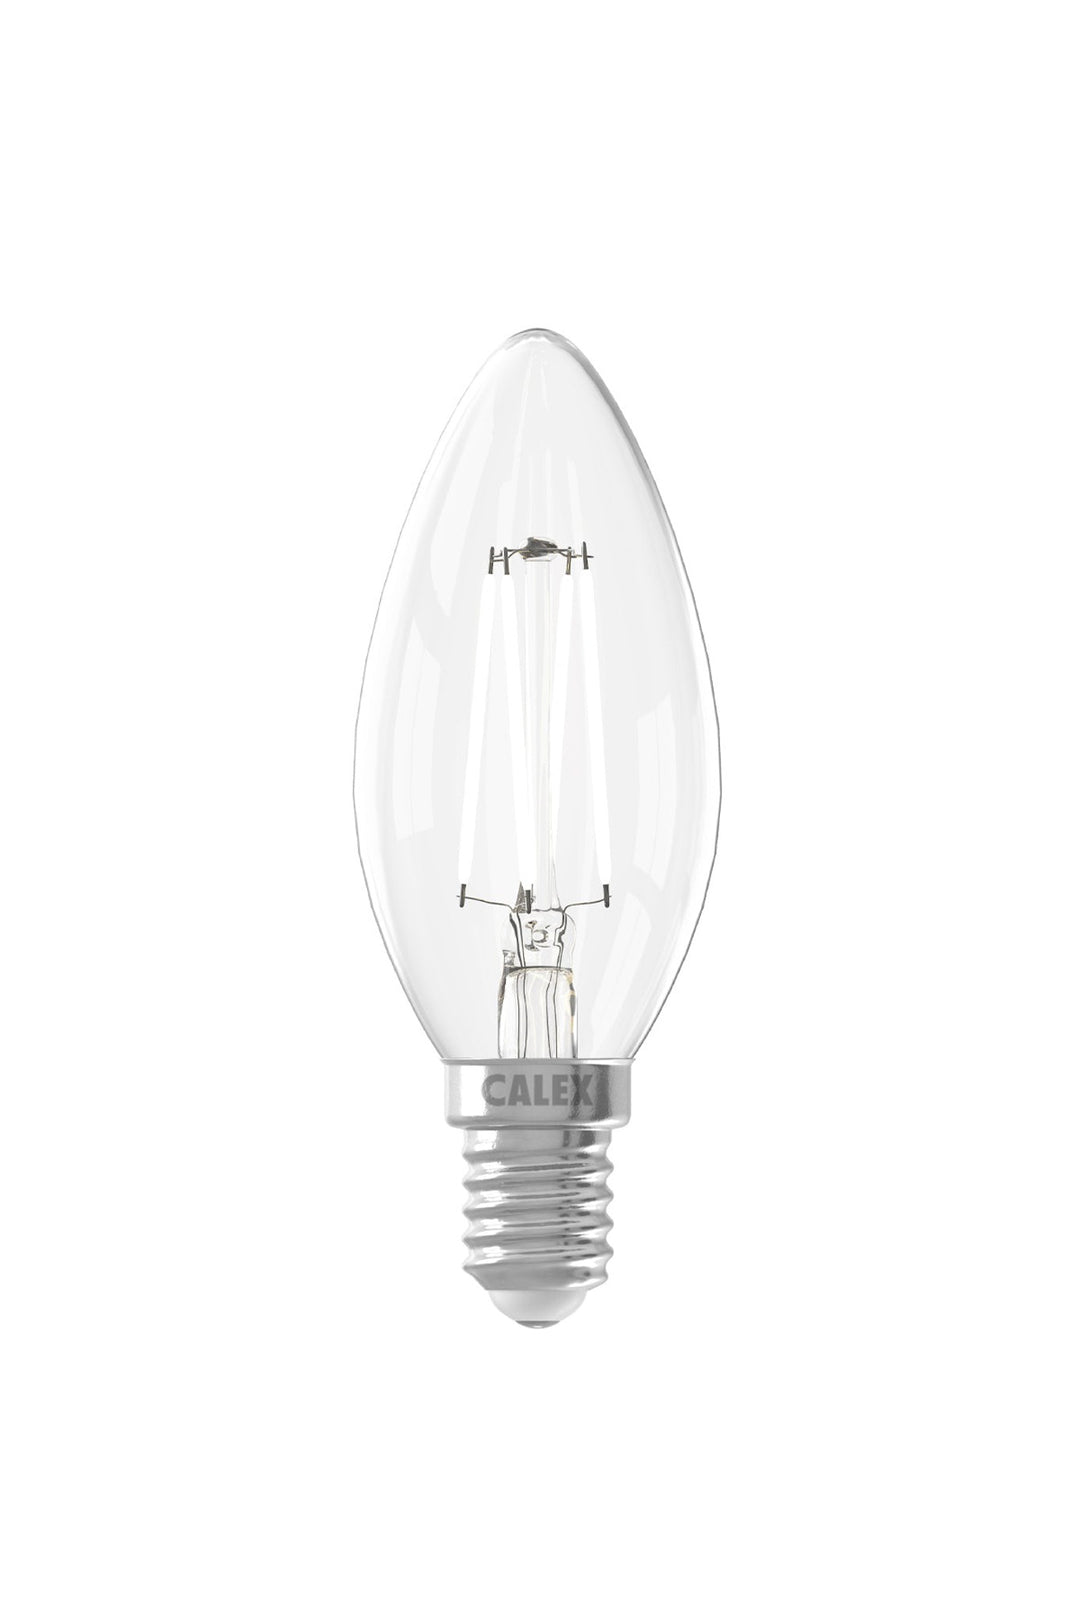 Calex LED Functional Filament Candle Lamp B35, Clear, E14, Dimmable 1101006700